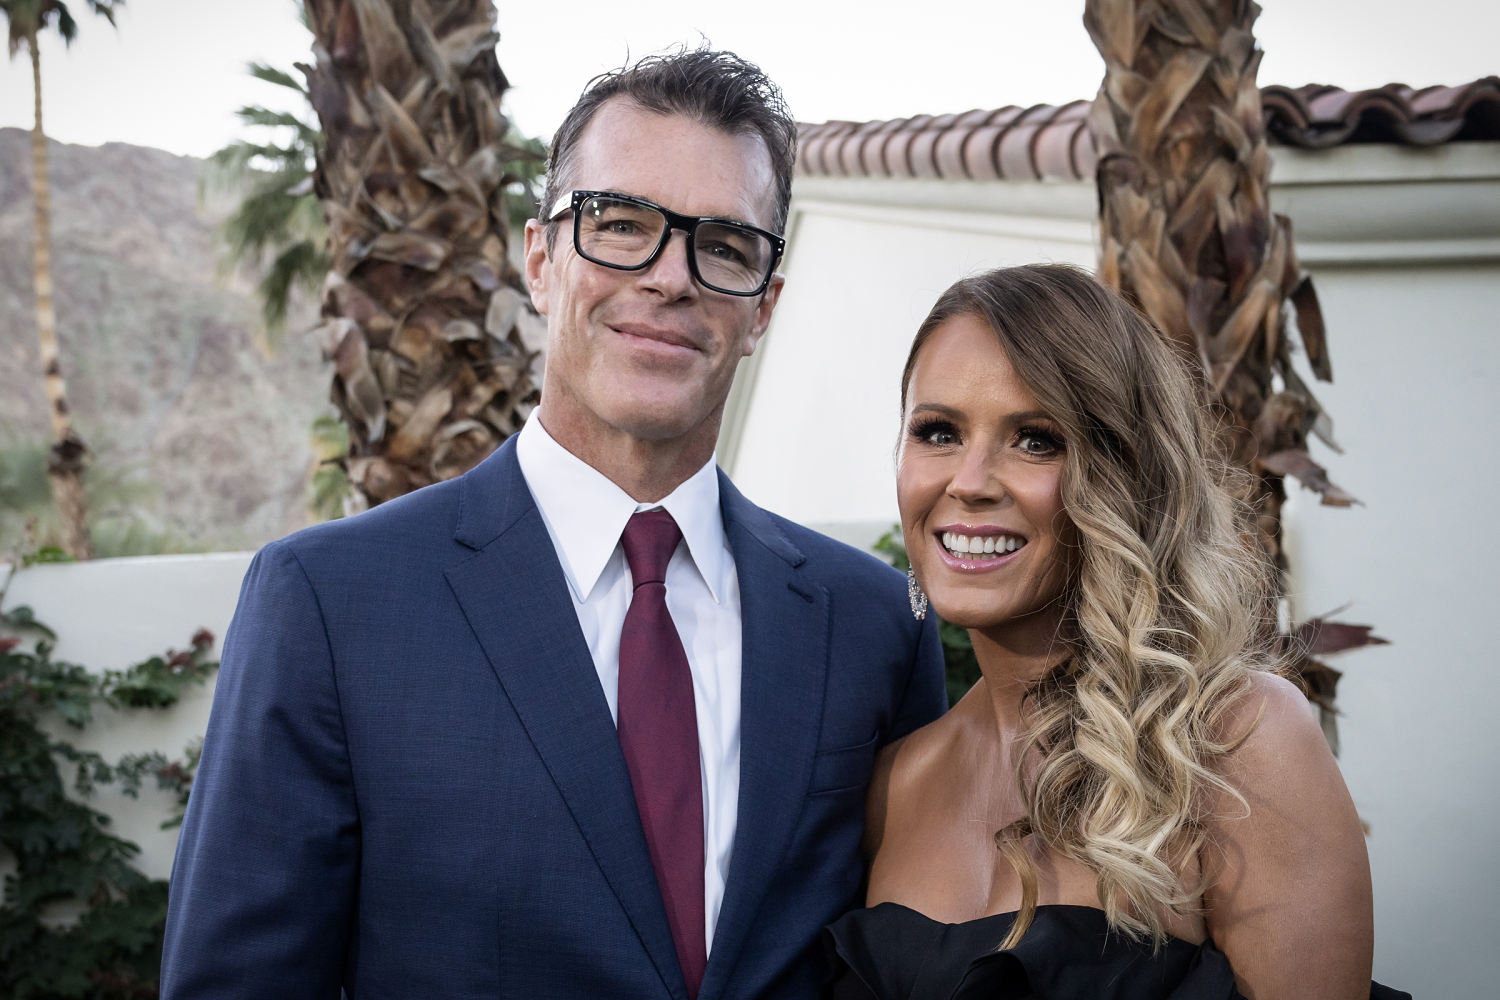 Ryan Sutter clarifies his cryptic Mother’s Day post about wife Trista: 'She is searching a bit'